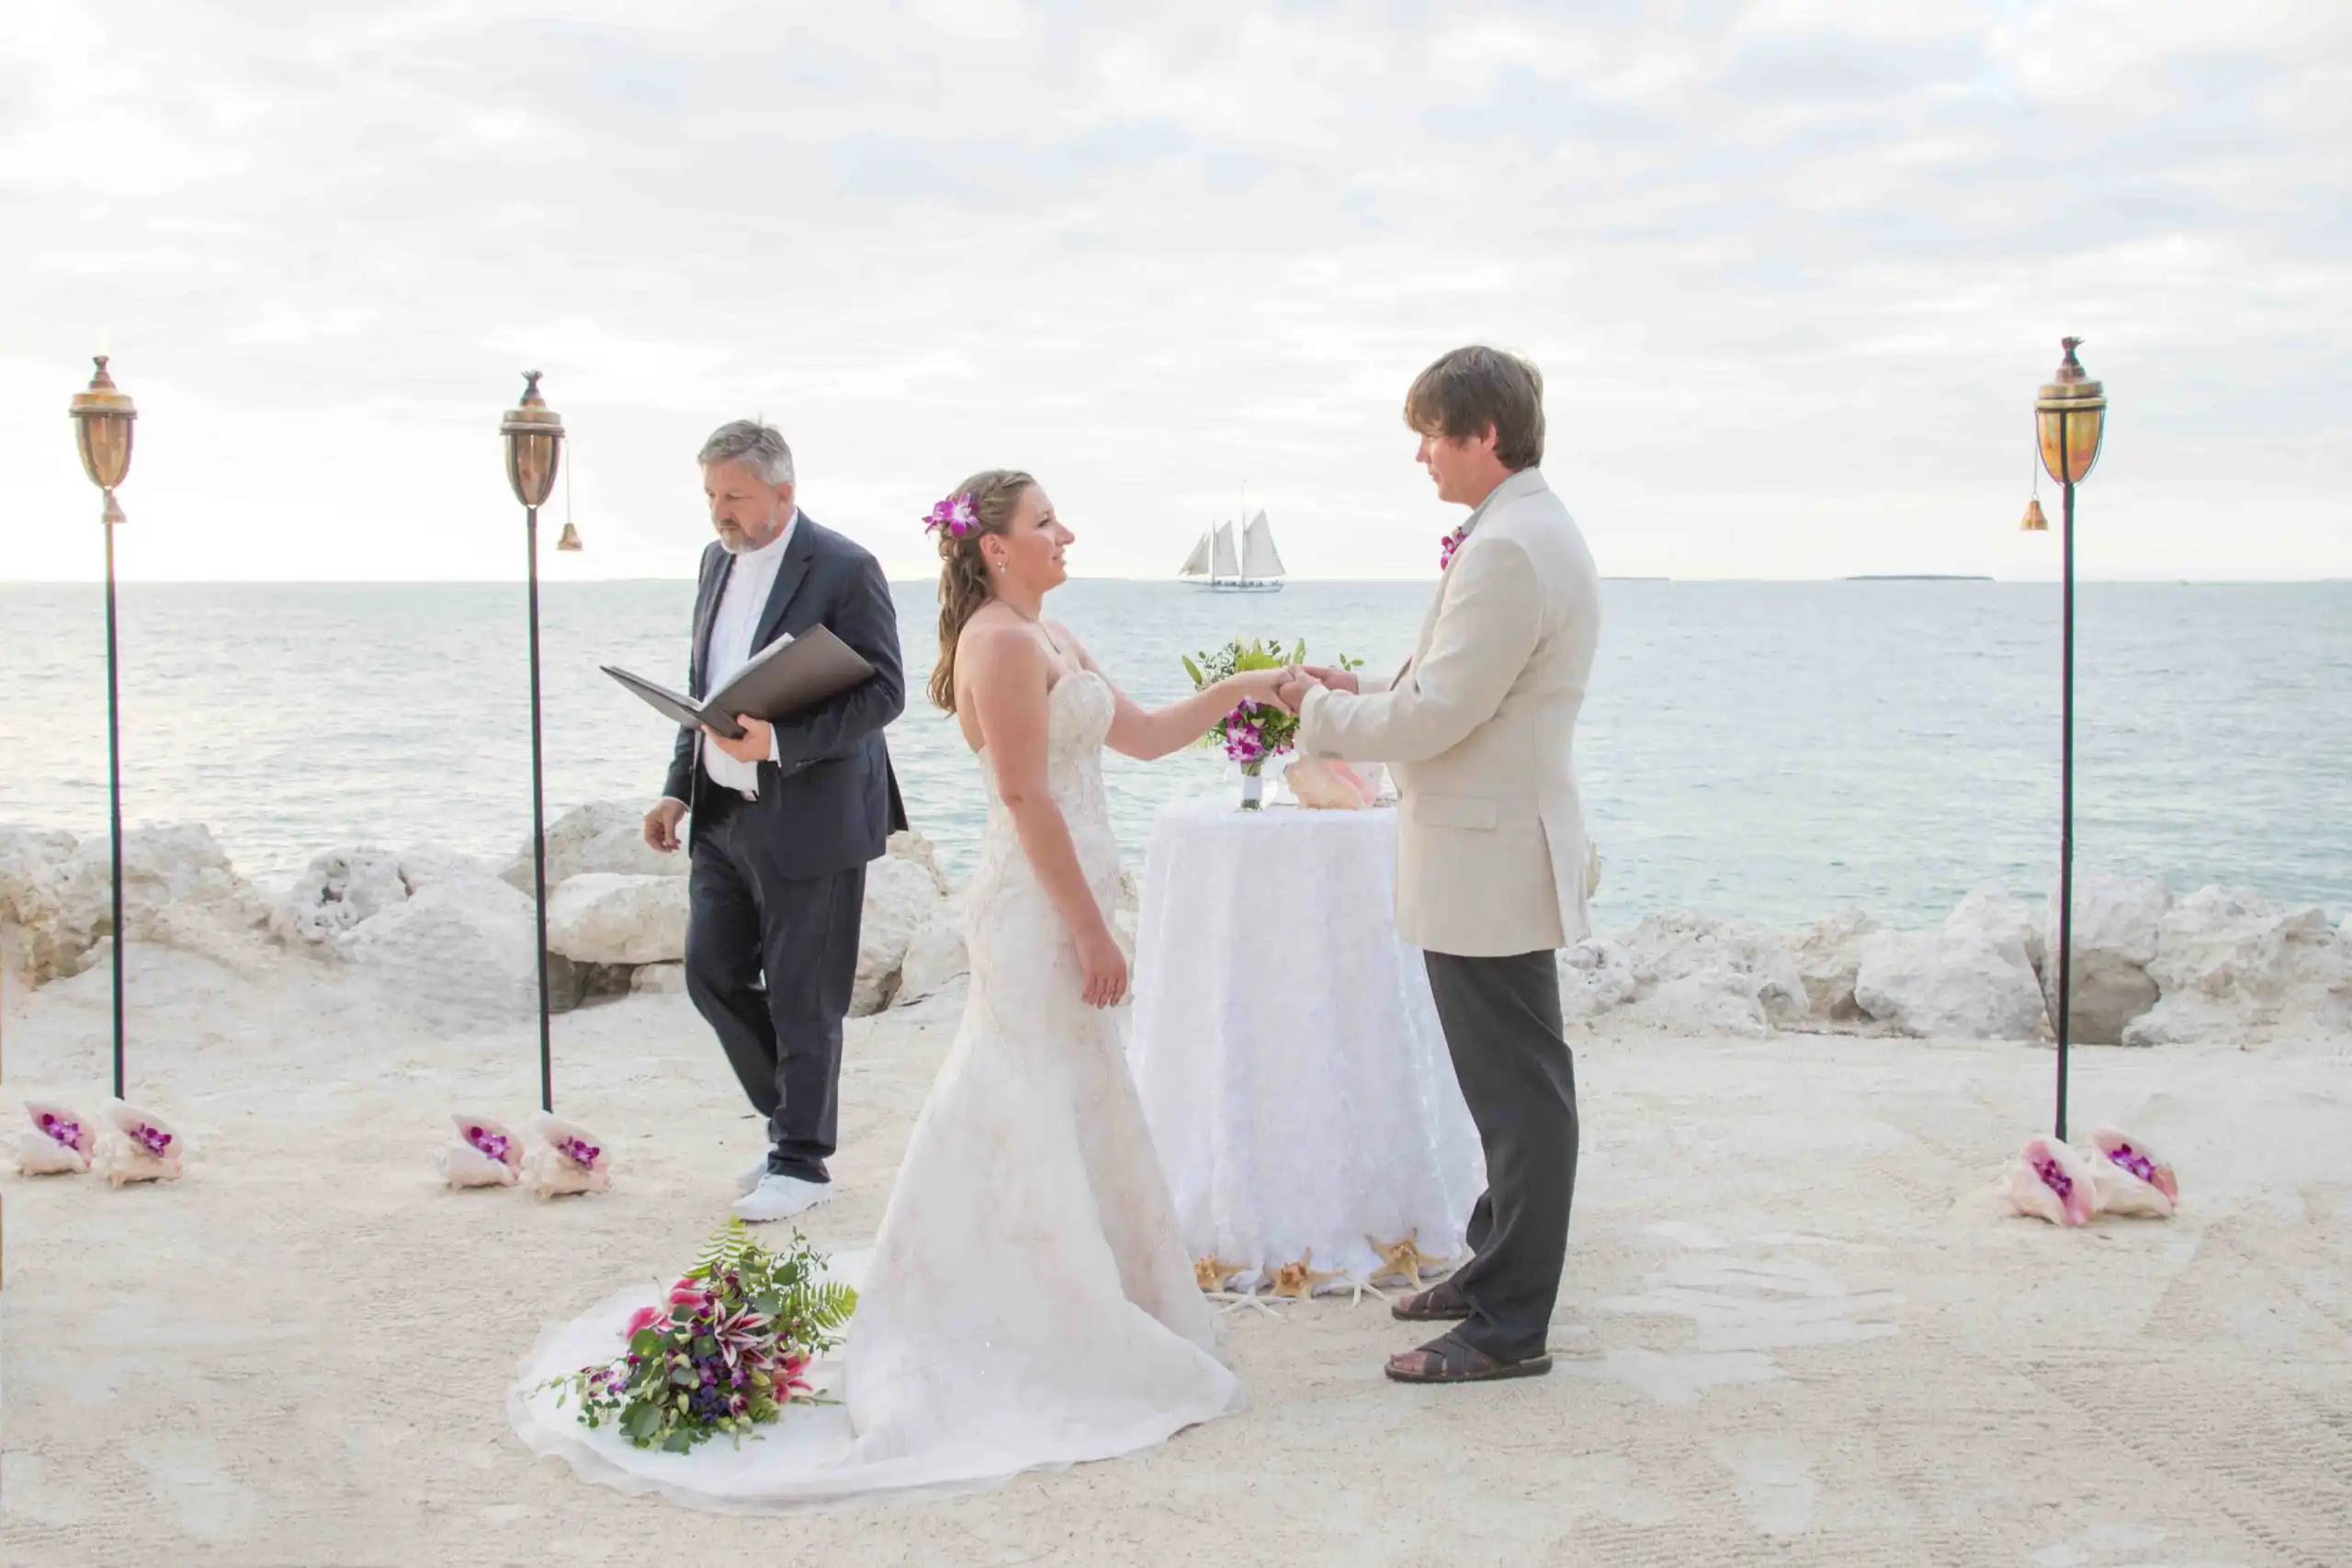 Key West wedding planners create customized key west wedding packages as a bride and groom exchange vows in front of the ocean.